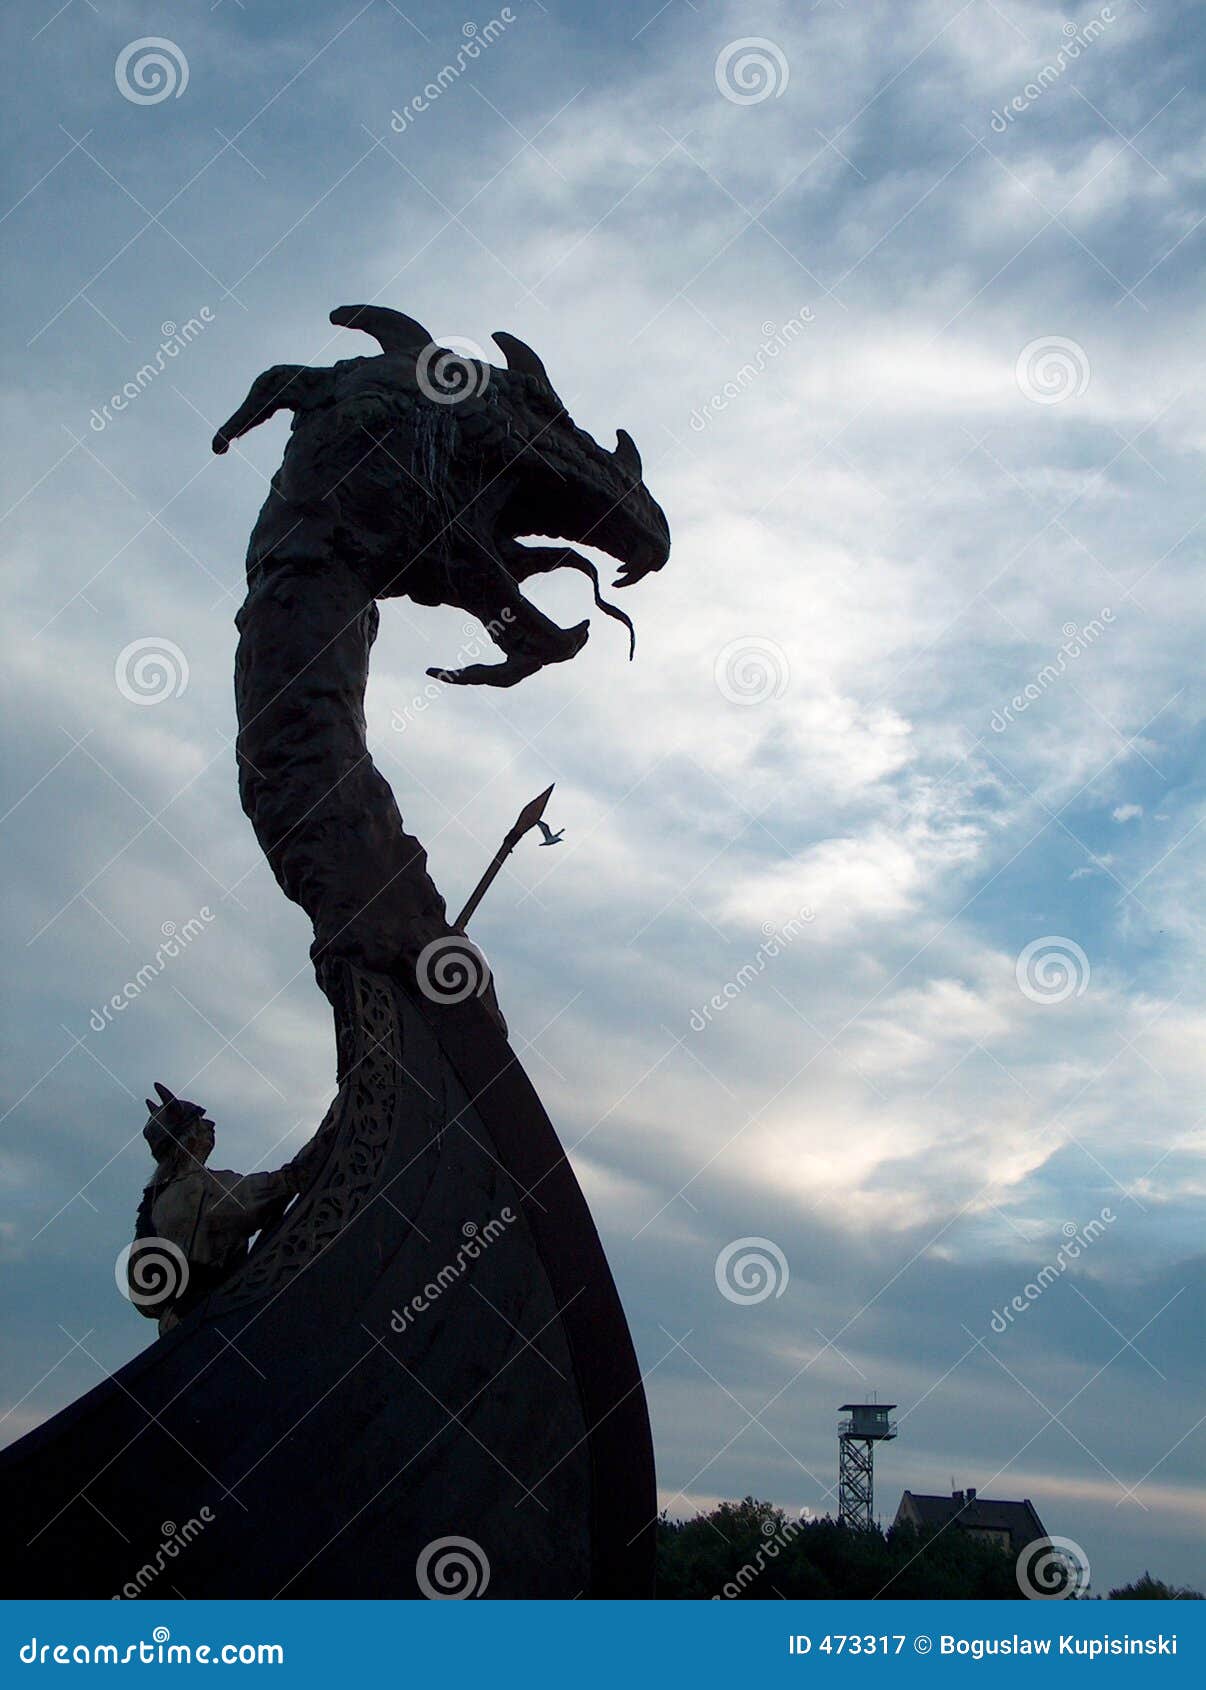 viking's dragon on the boat royalty free stock photography